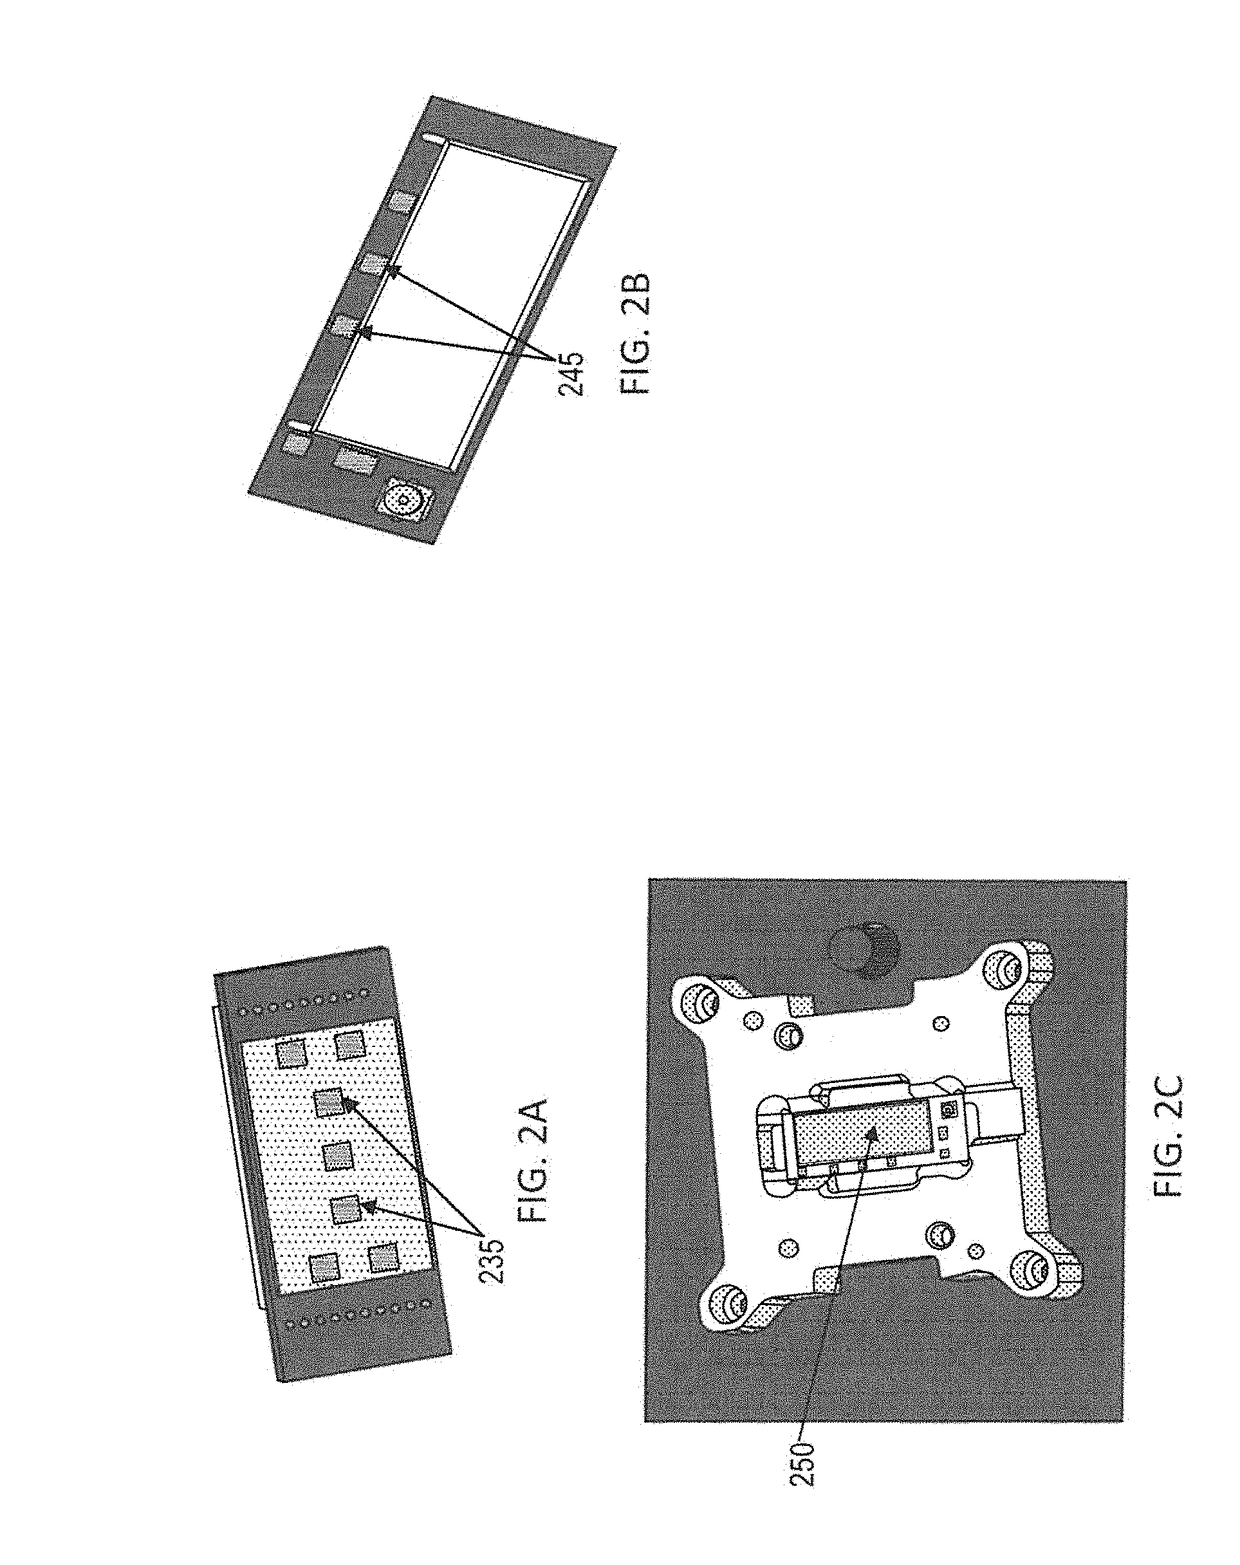 Handler with integrated receiver and signal path interface to tester